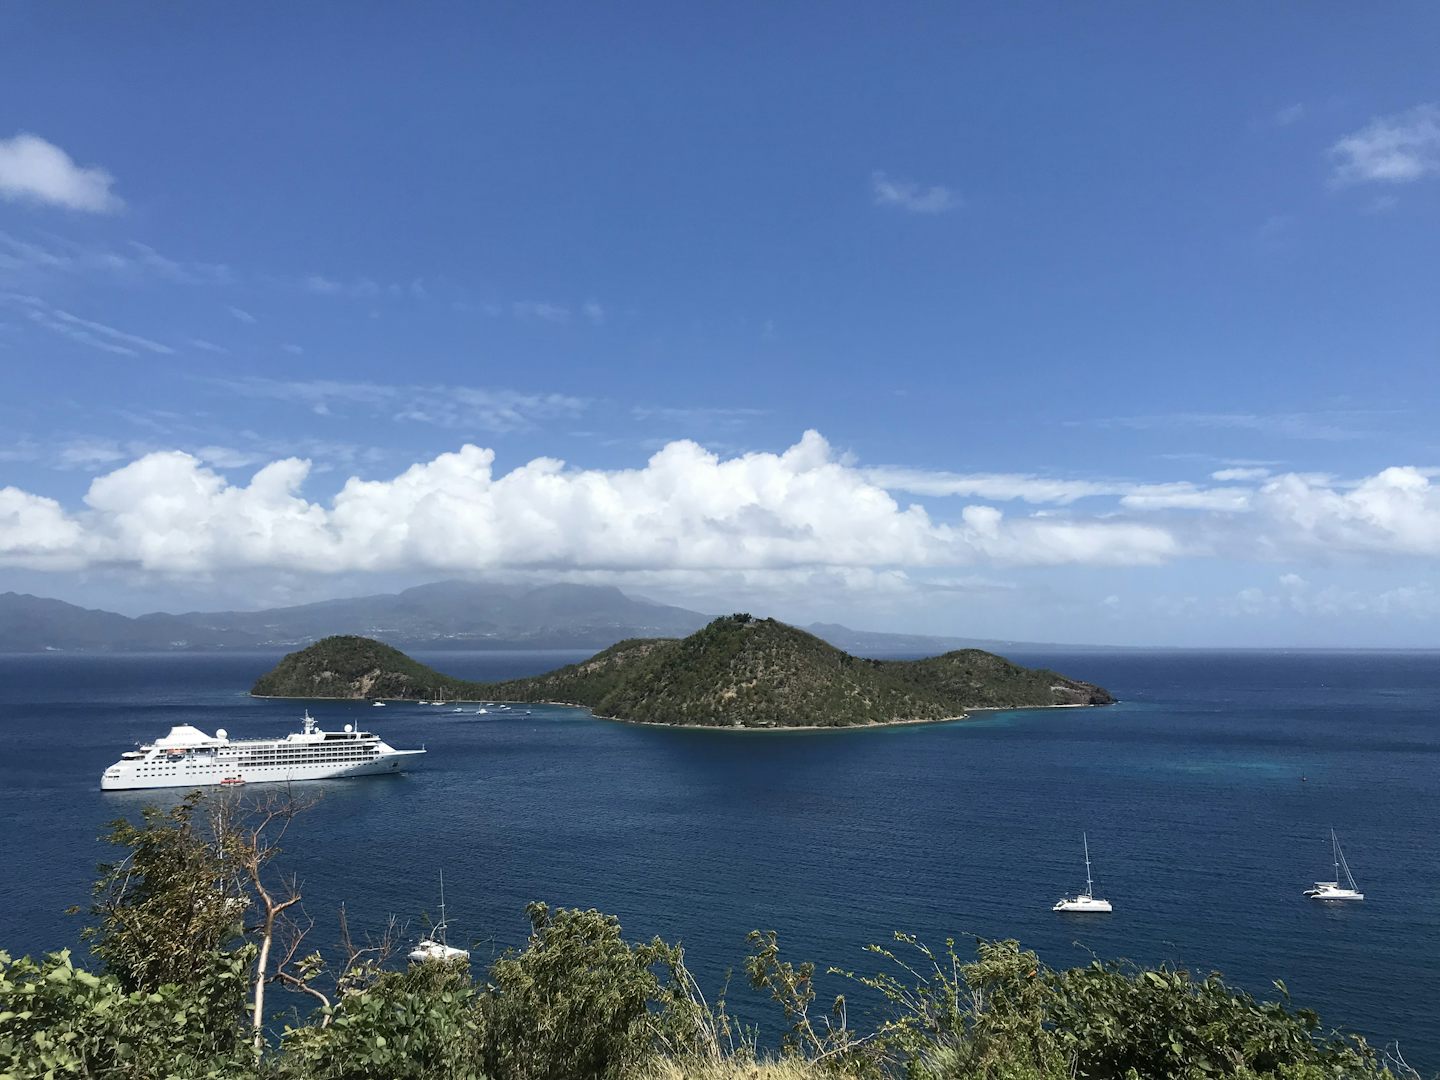 Silver Wind anchored in Les Saintes.